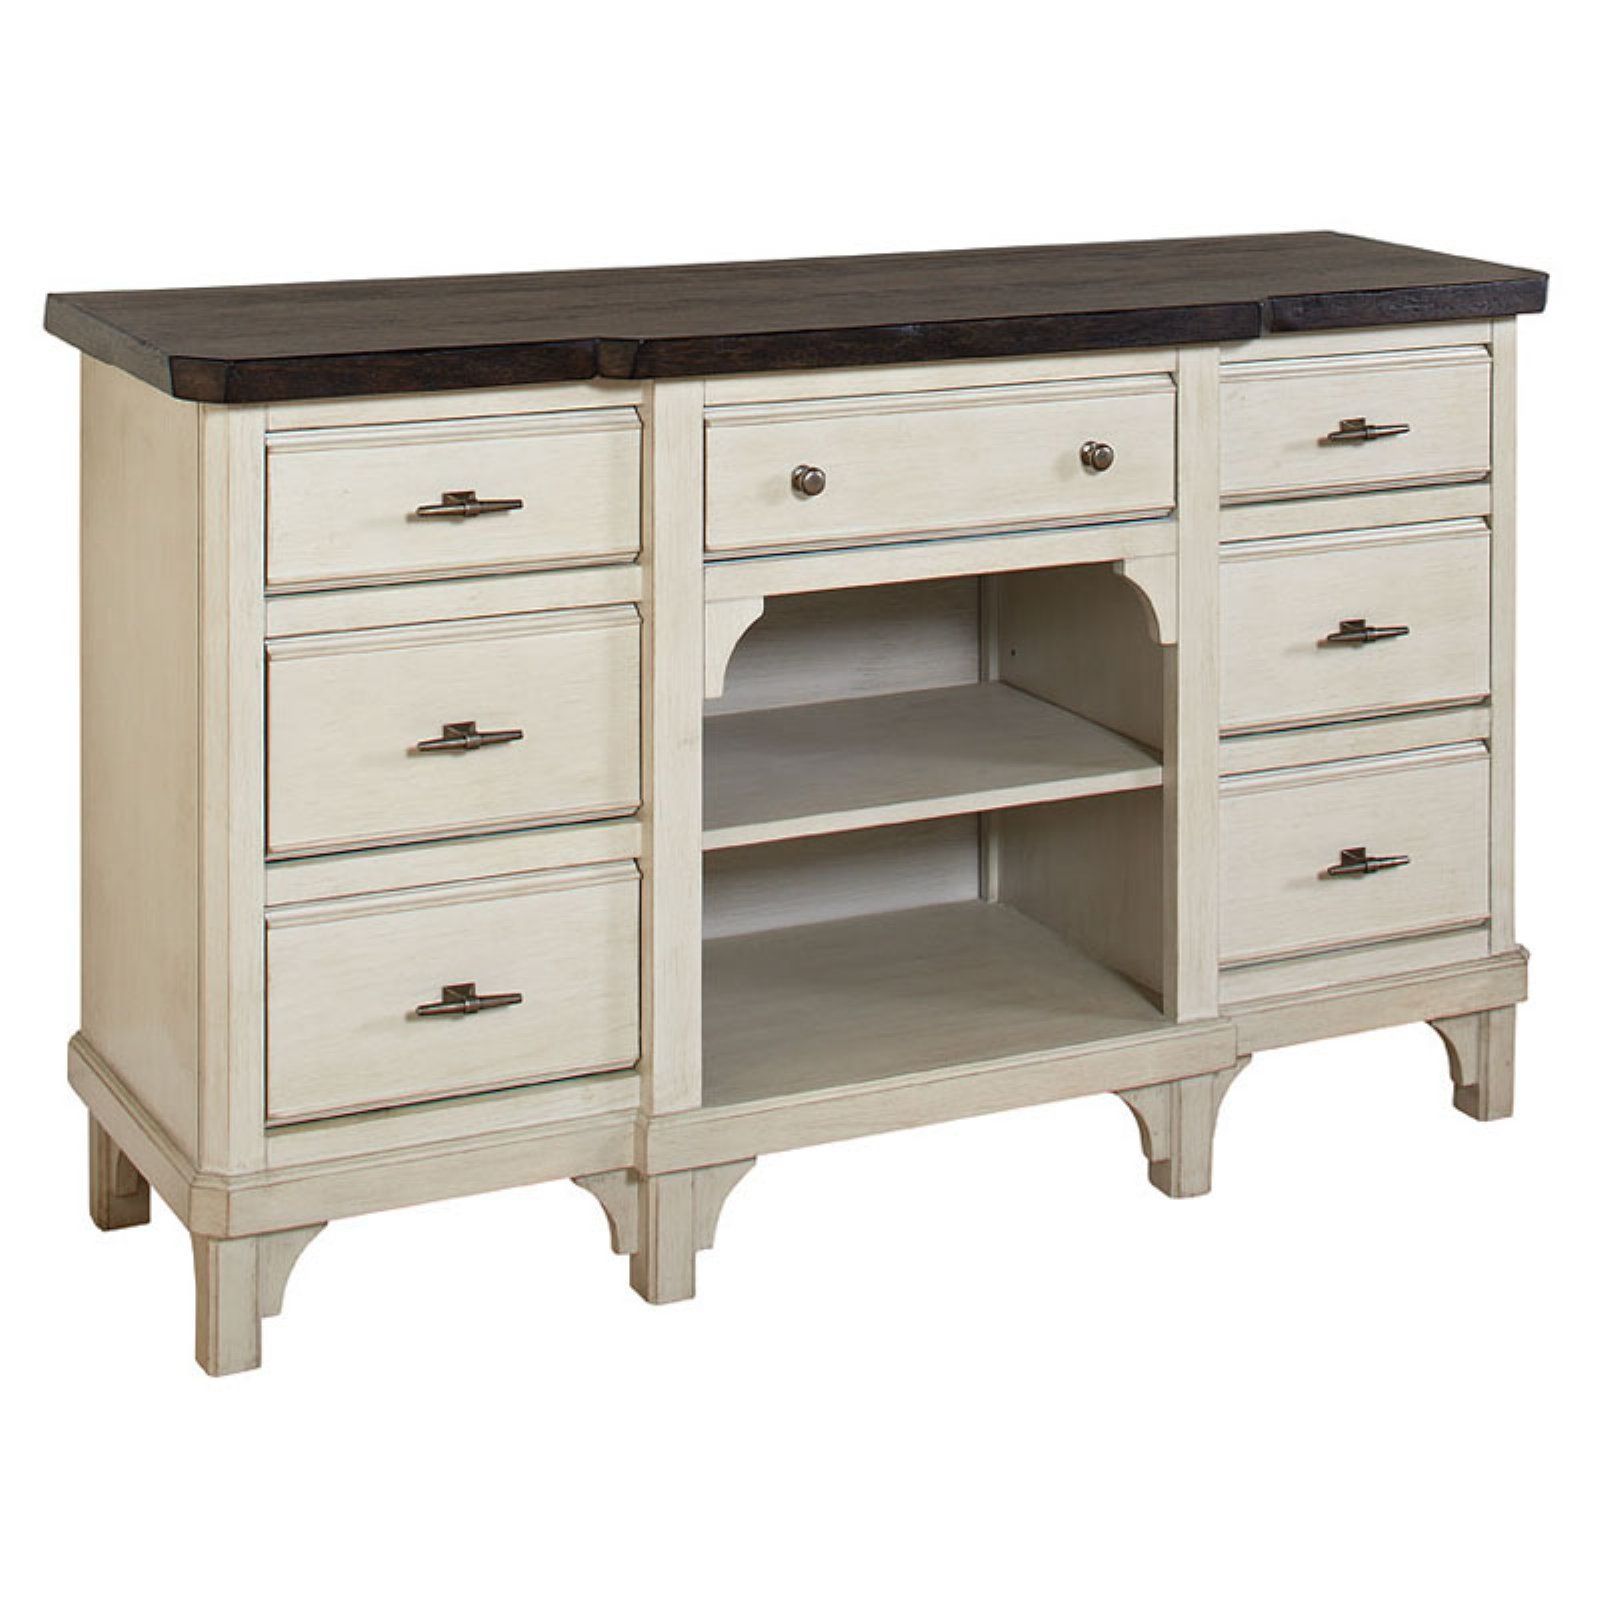 Avalon Furniture Mystic Cay Sideboard | Products In 2019 With Regard To Recent Fugate 2 Door Credenzas (View 14 of 20)